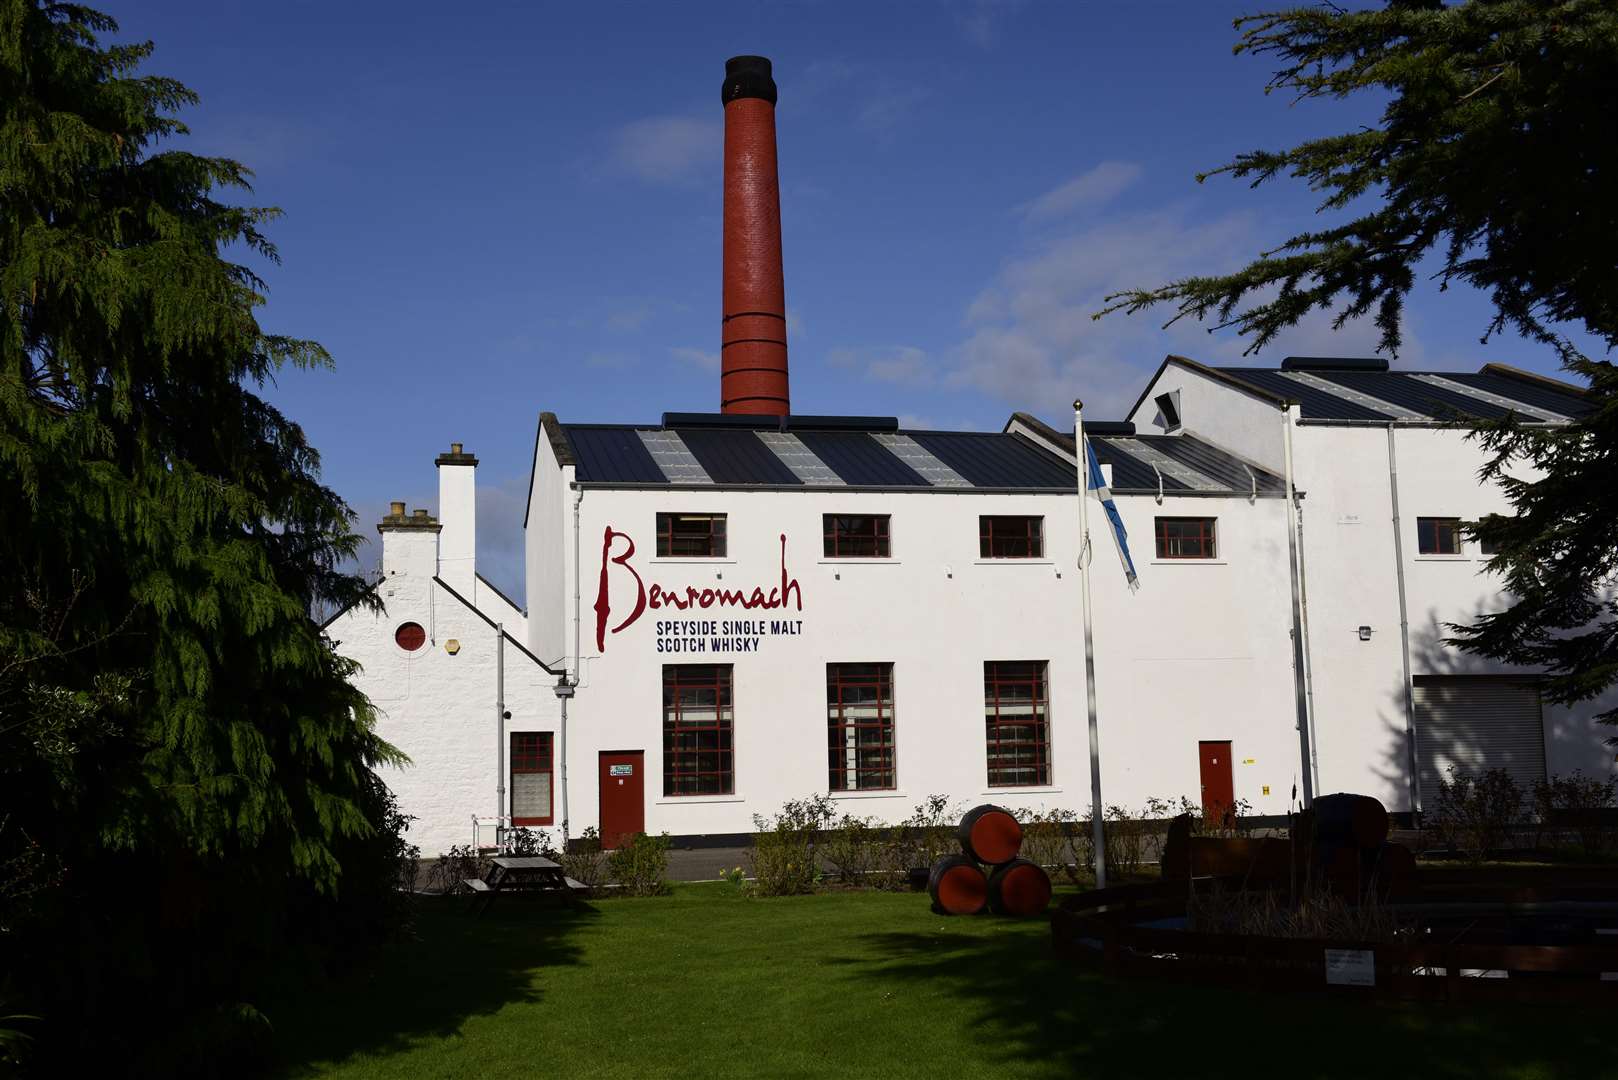 Benromach Distillery in Forres